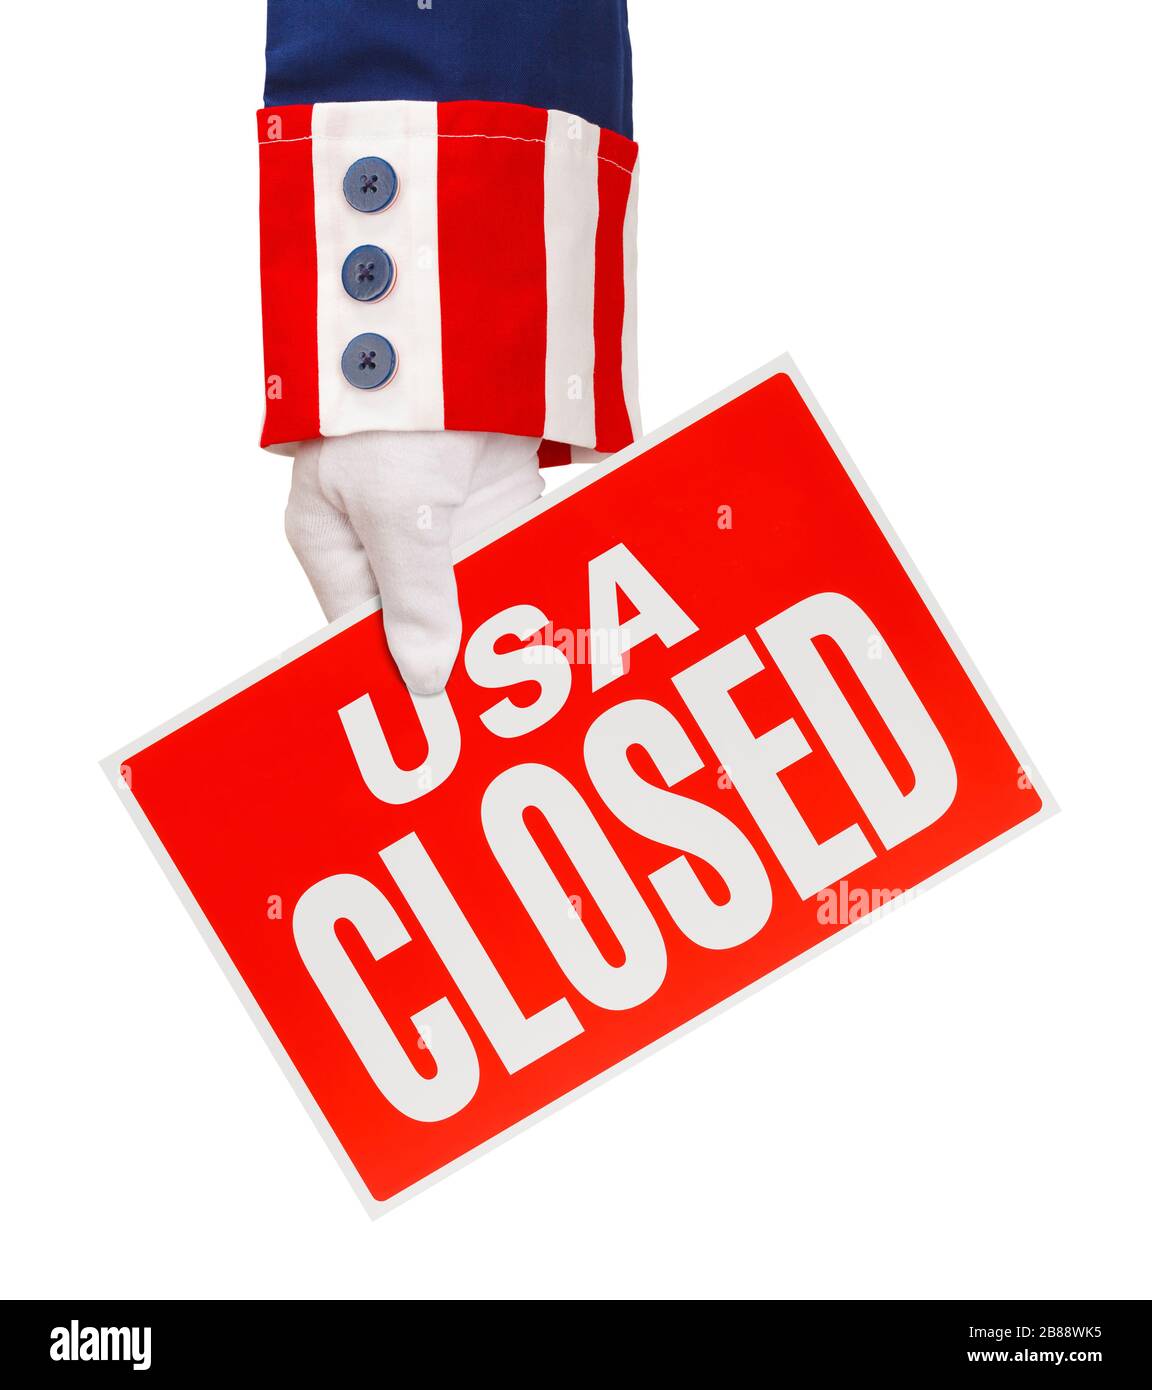 President Holding USA Closed Sign Isolated on White. Stock Photo